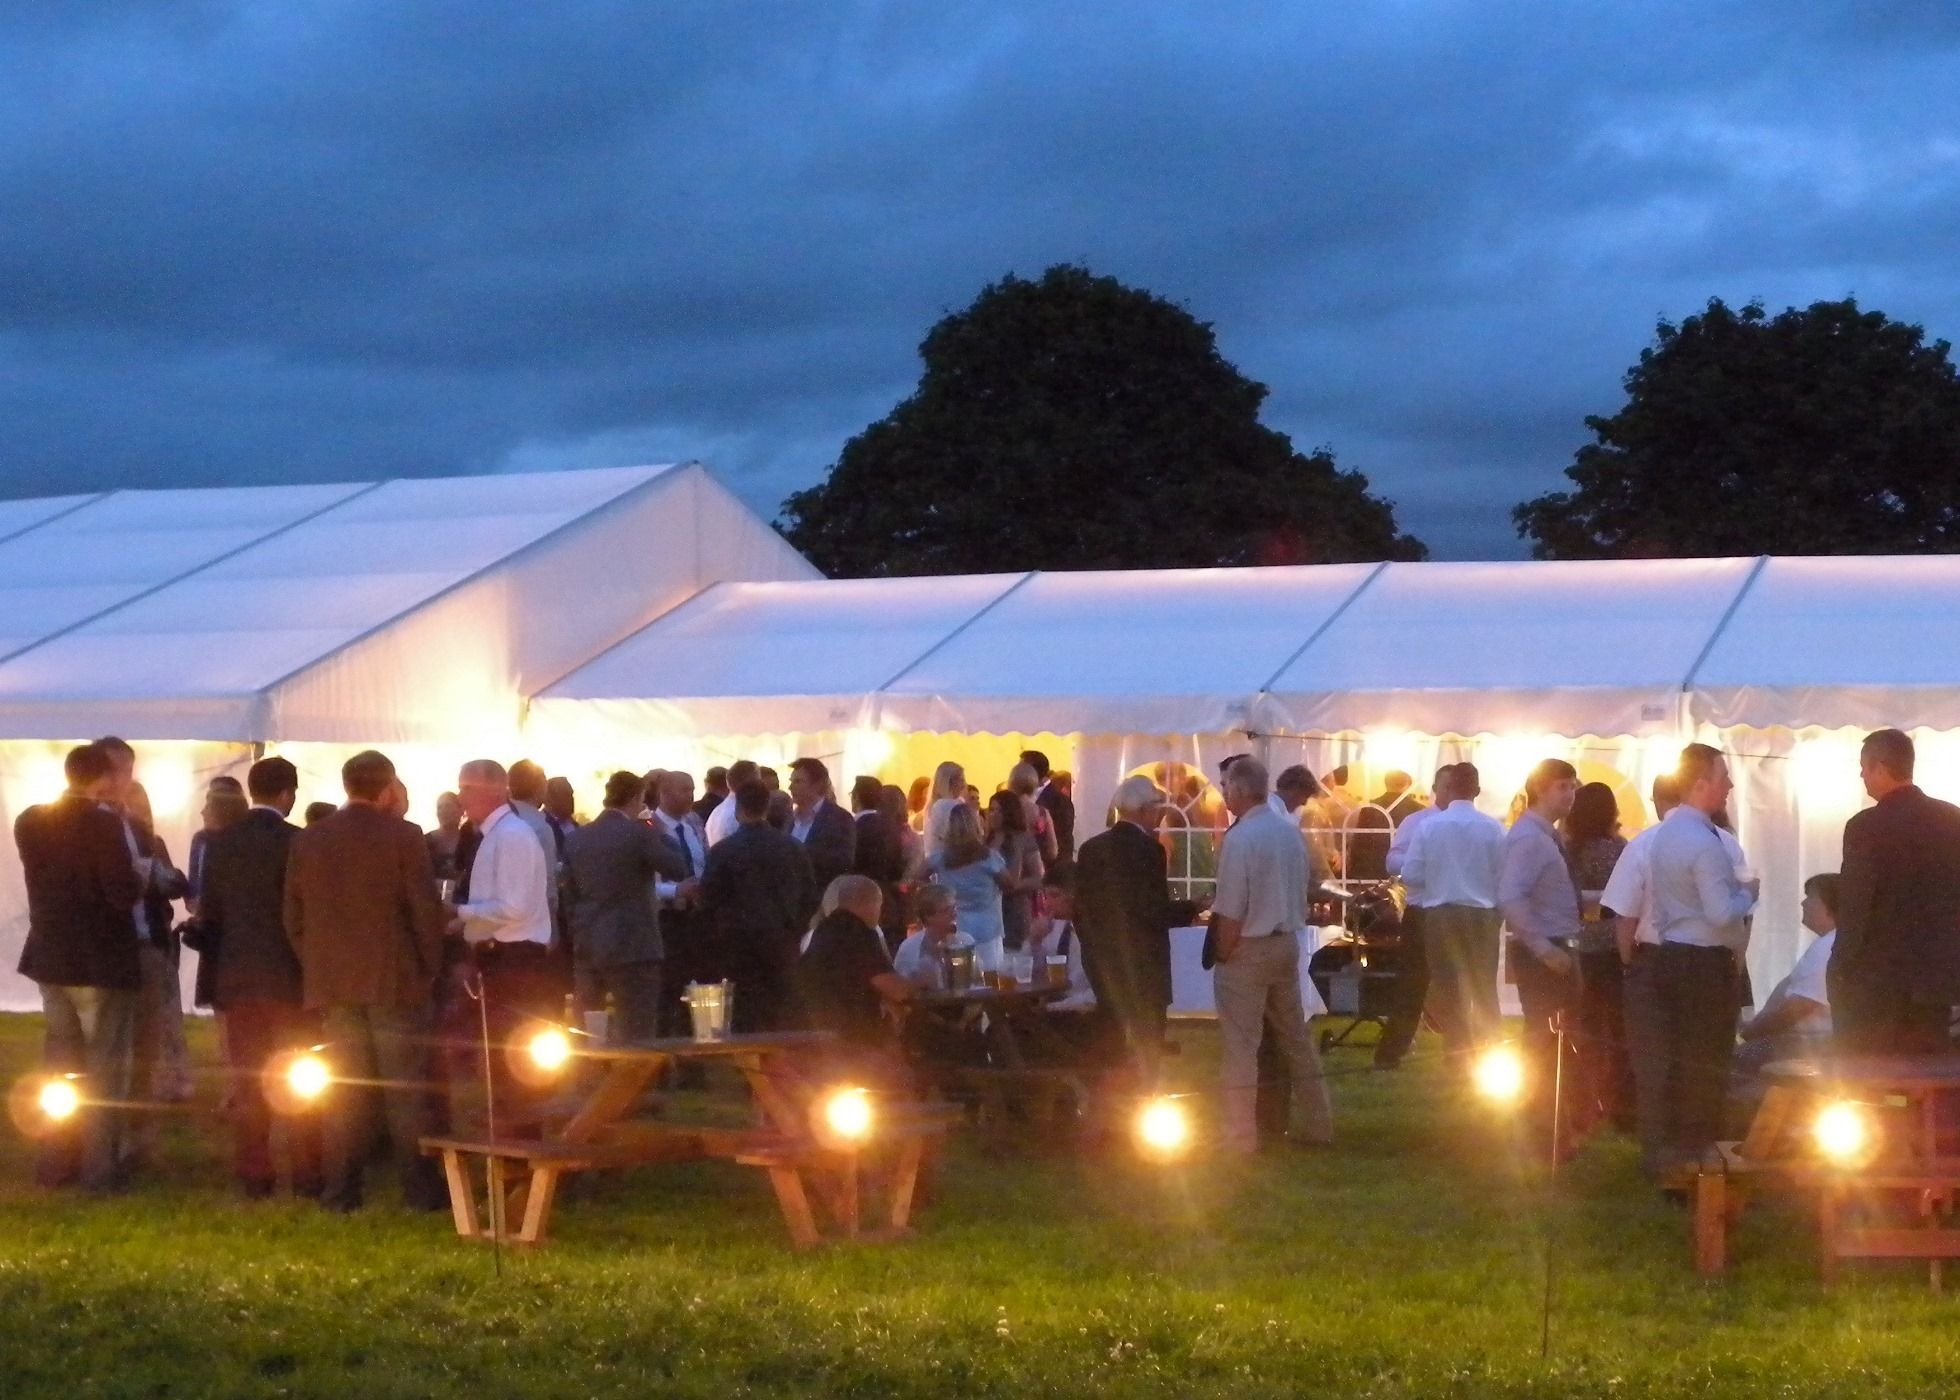 exterior view of marquee at night showing people mingling outside and festoon lighting